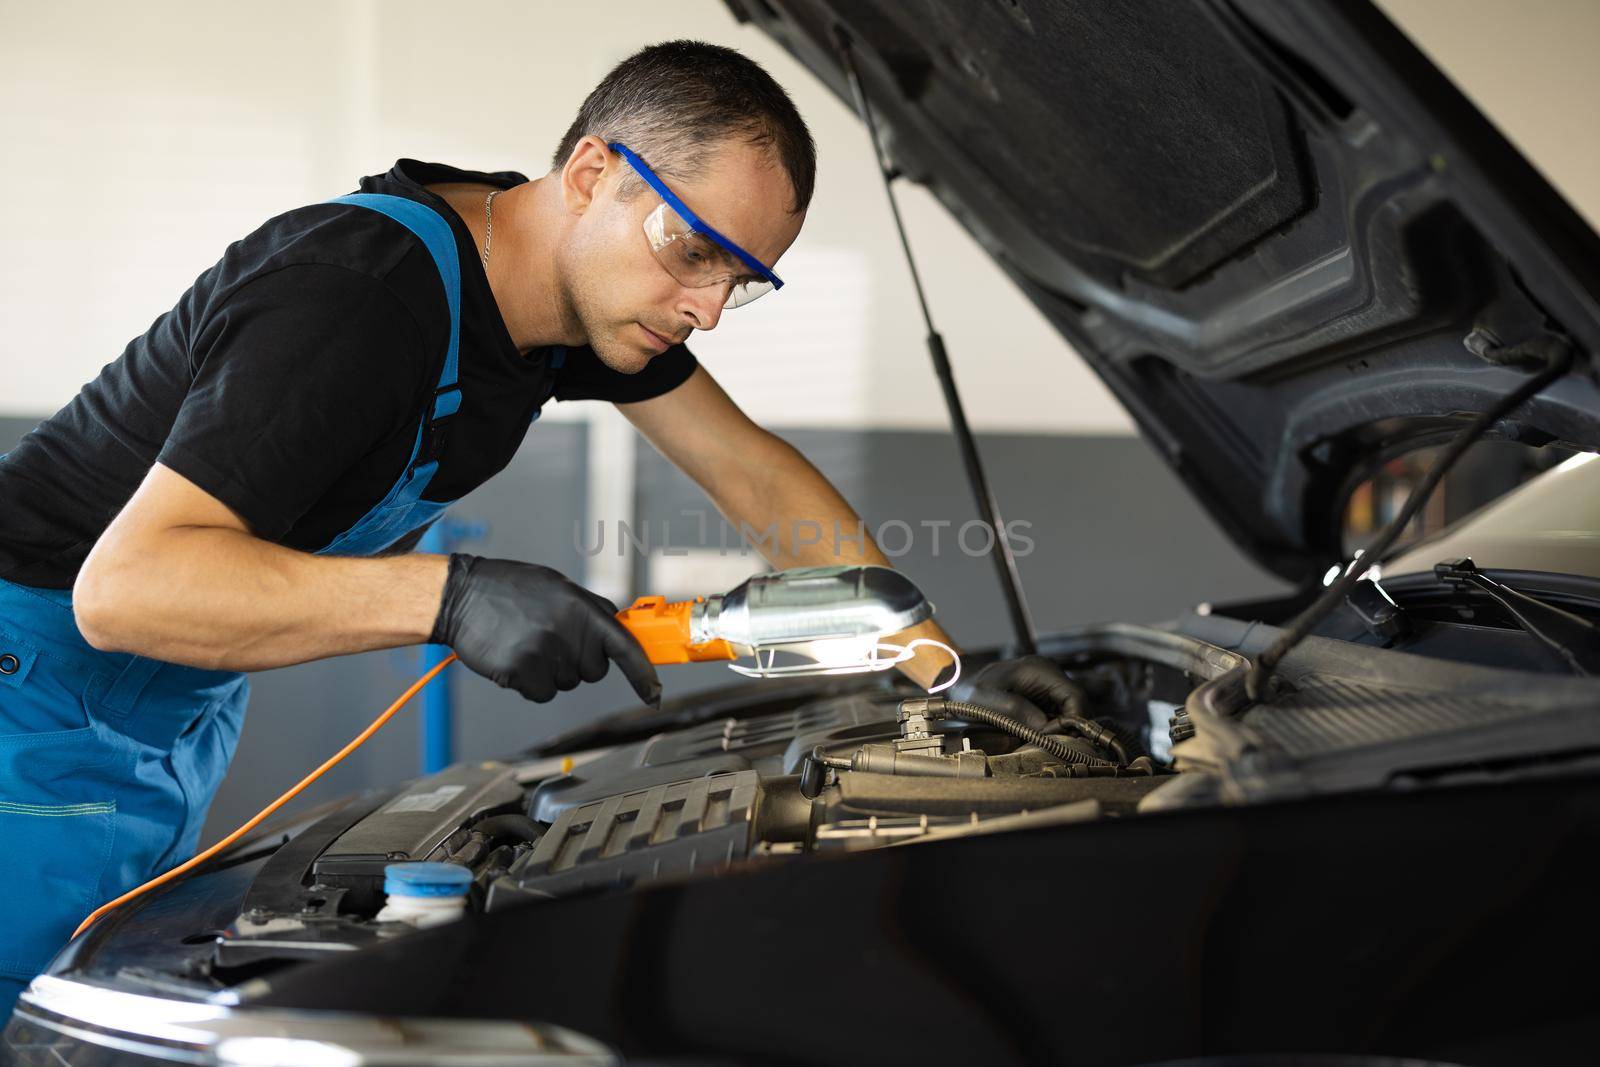 The mechanic in blue overalls and safety glasses inspects the car while working with led lamp. The work of a car mechanic in a modern workshop, car service